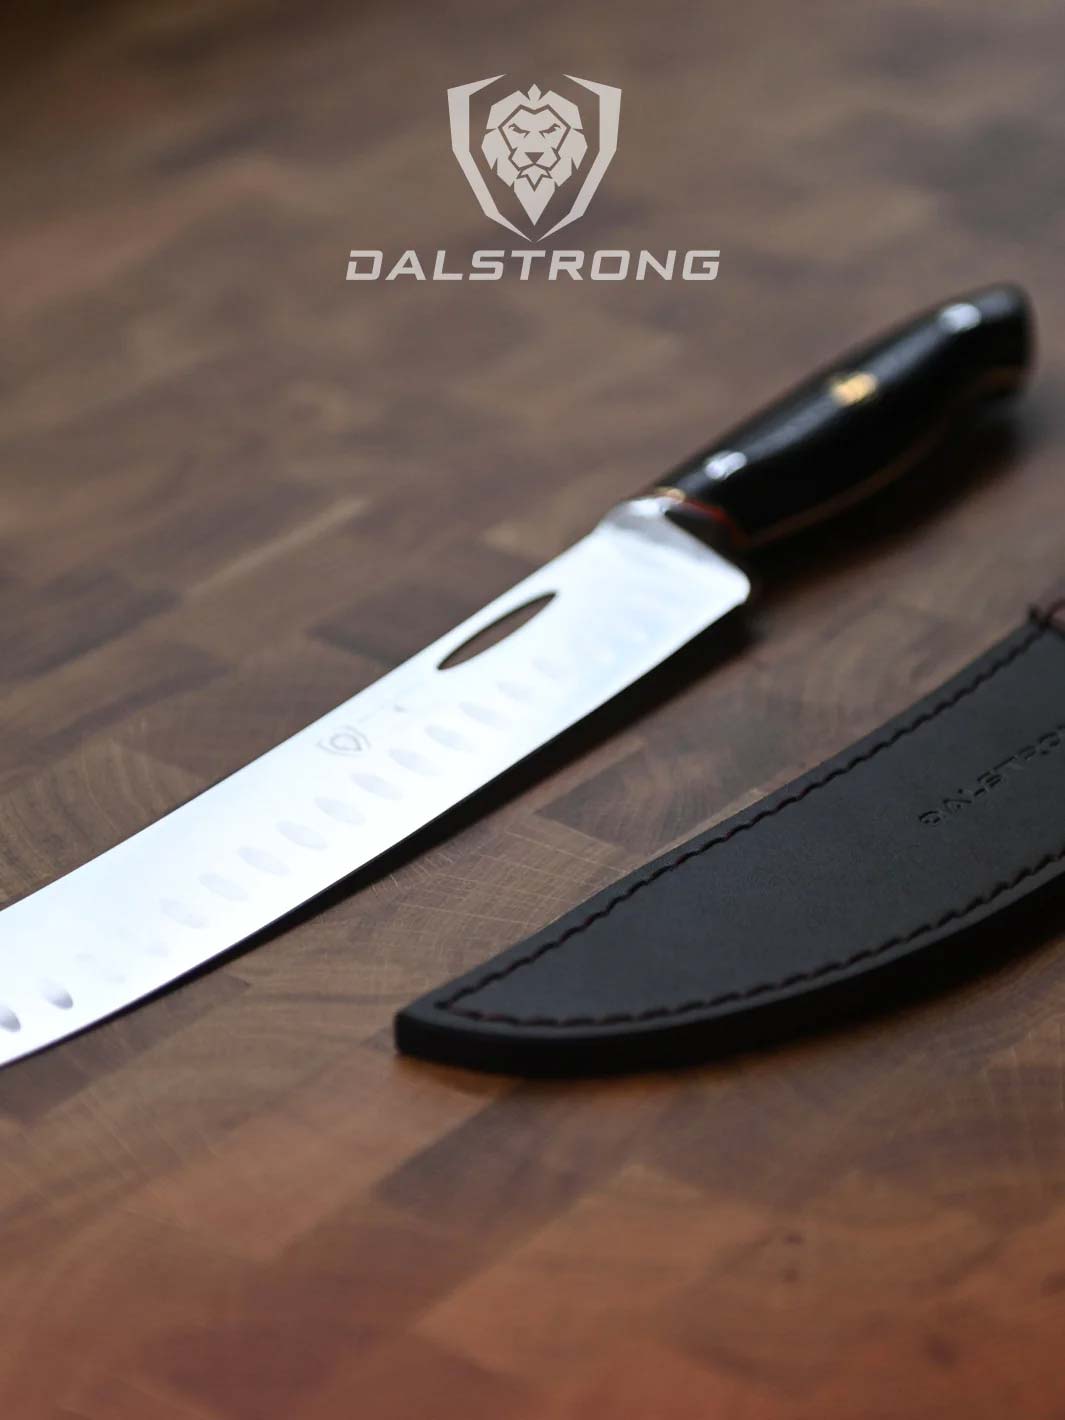 Dalstrong centurion series 10 inch butcher and breaking knife with black handle beside it's sheath.